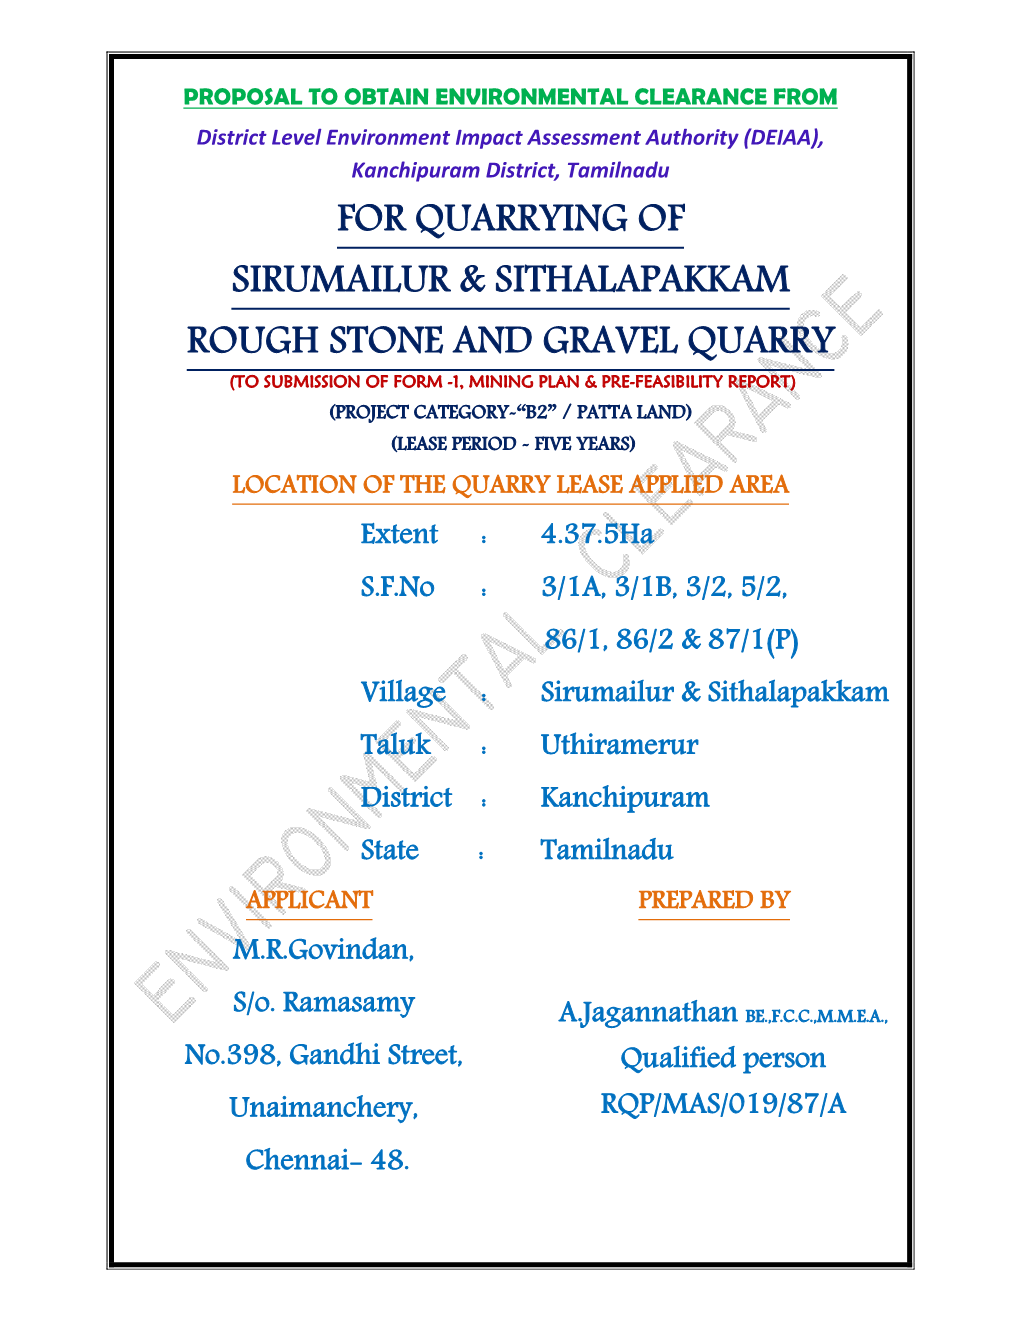 For Quarrying of Sirumailur & Sithalapakkam Rough Stone and Gravel Quarry